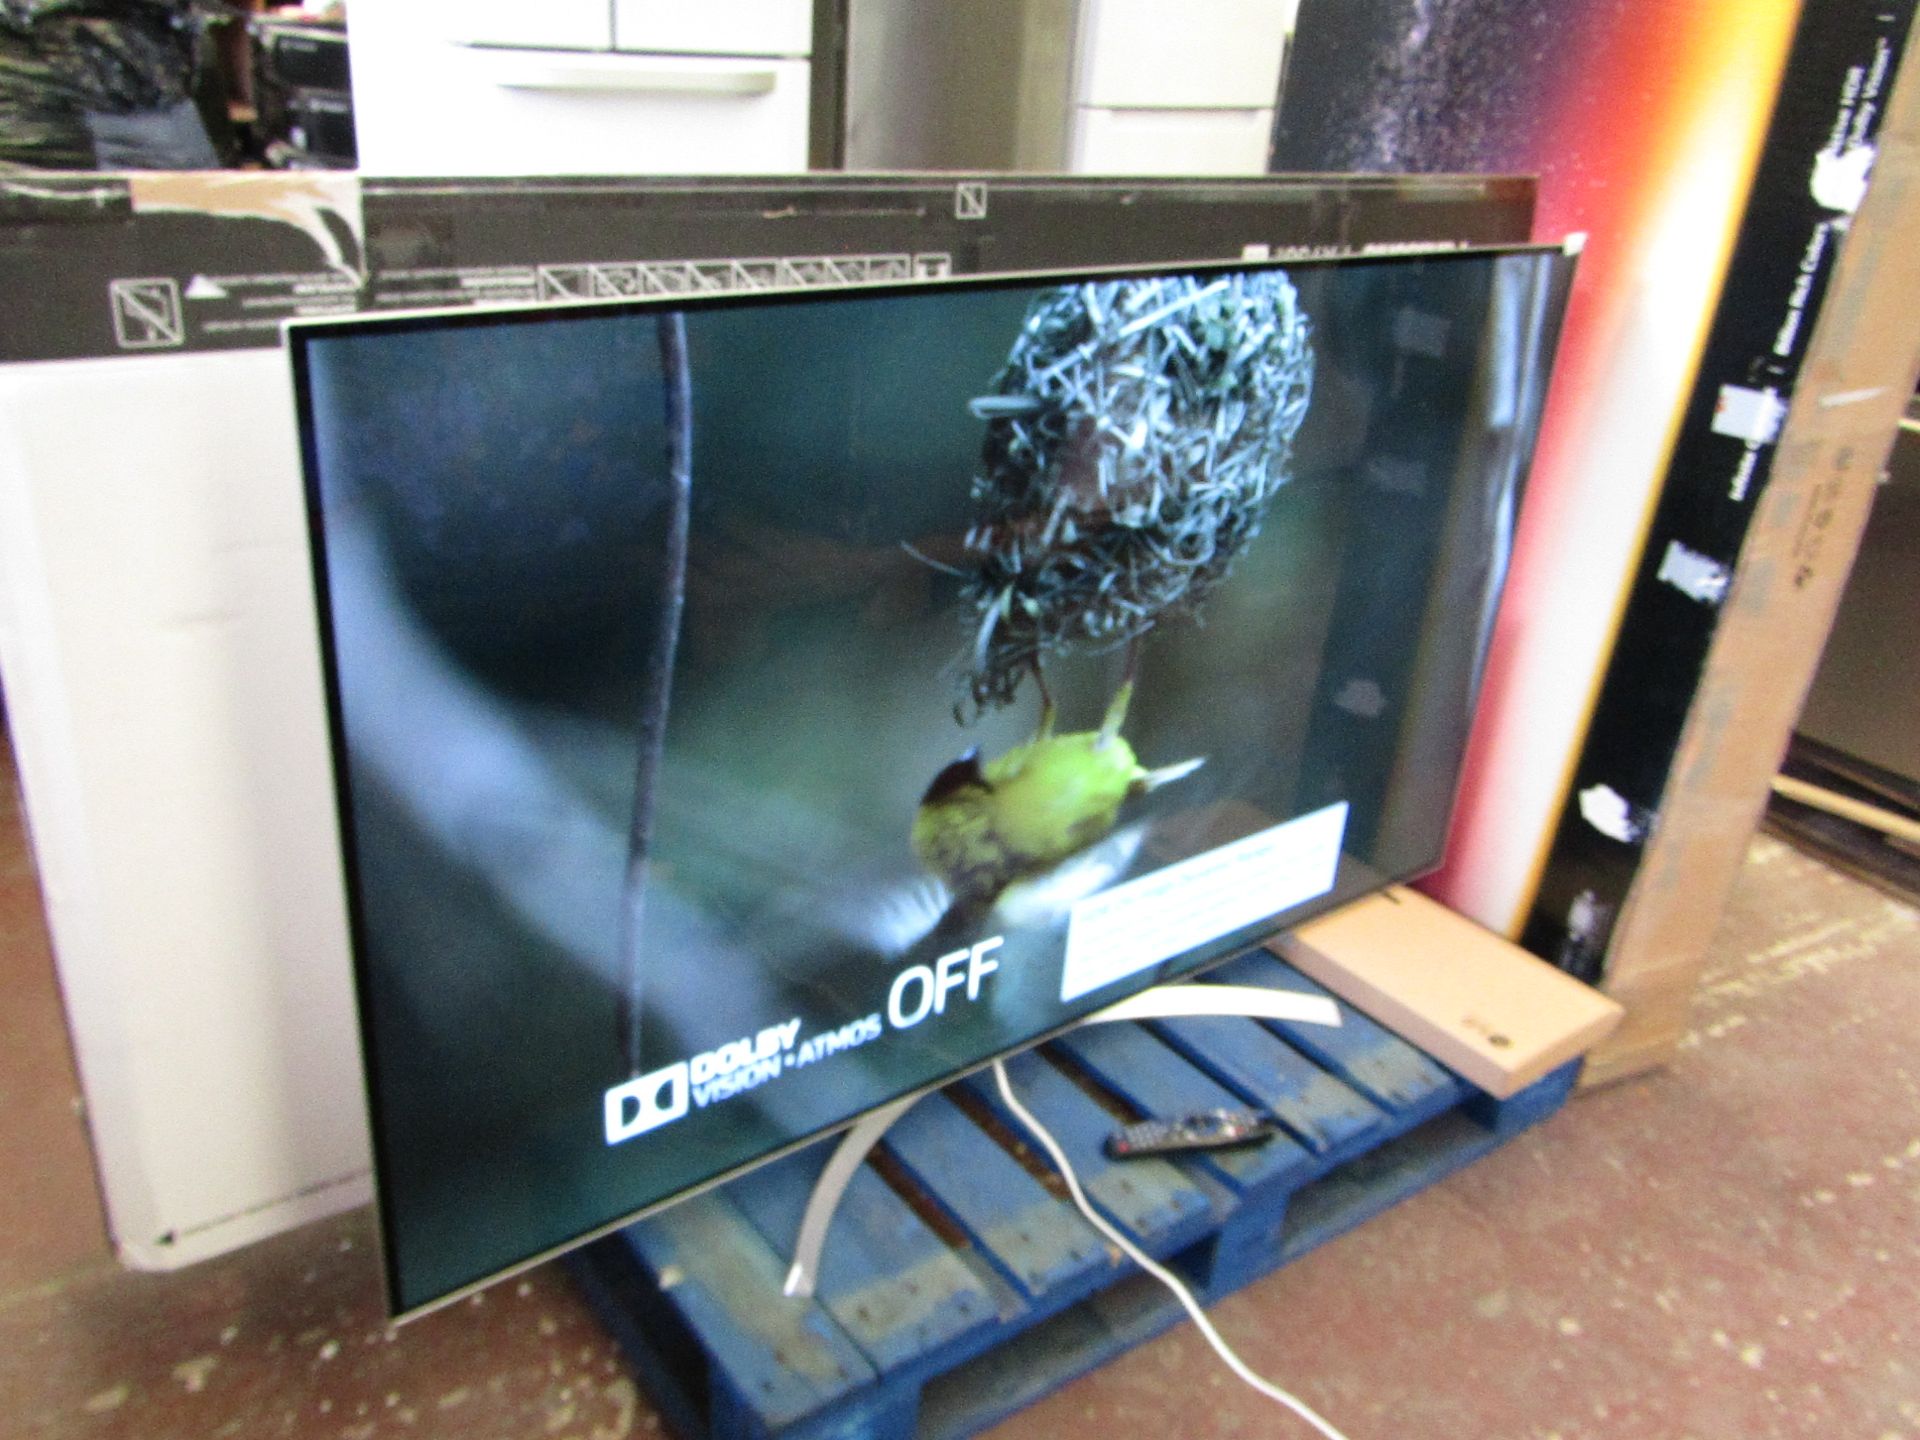 LG 65B7 65" OLED TV with original box and remote control, Line on screen, with a feint band